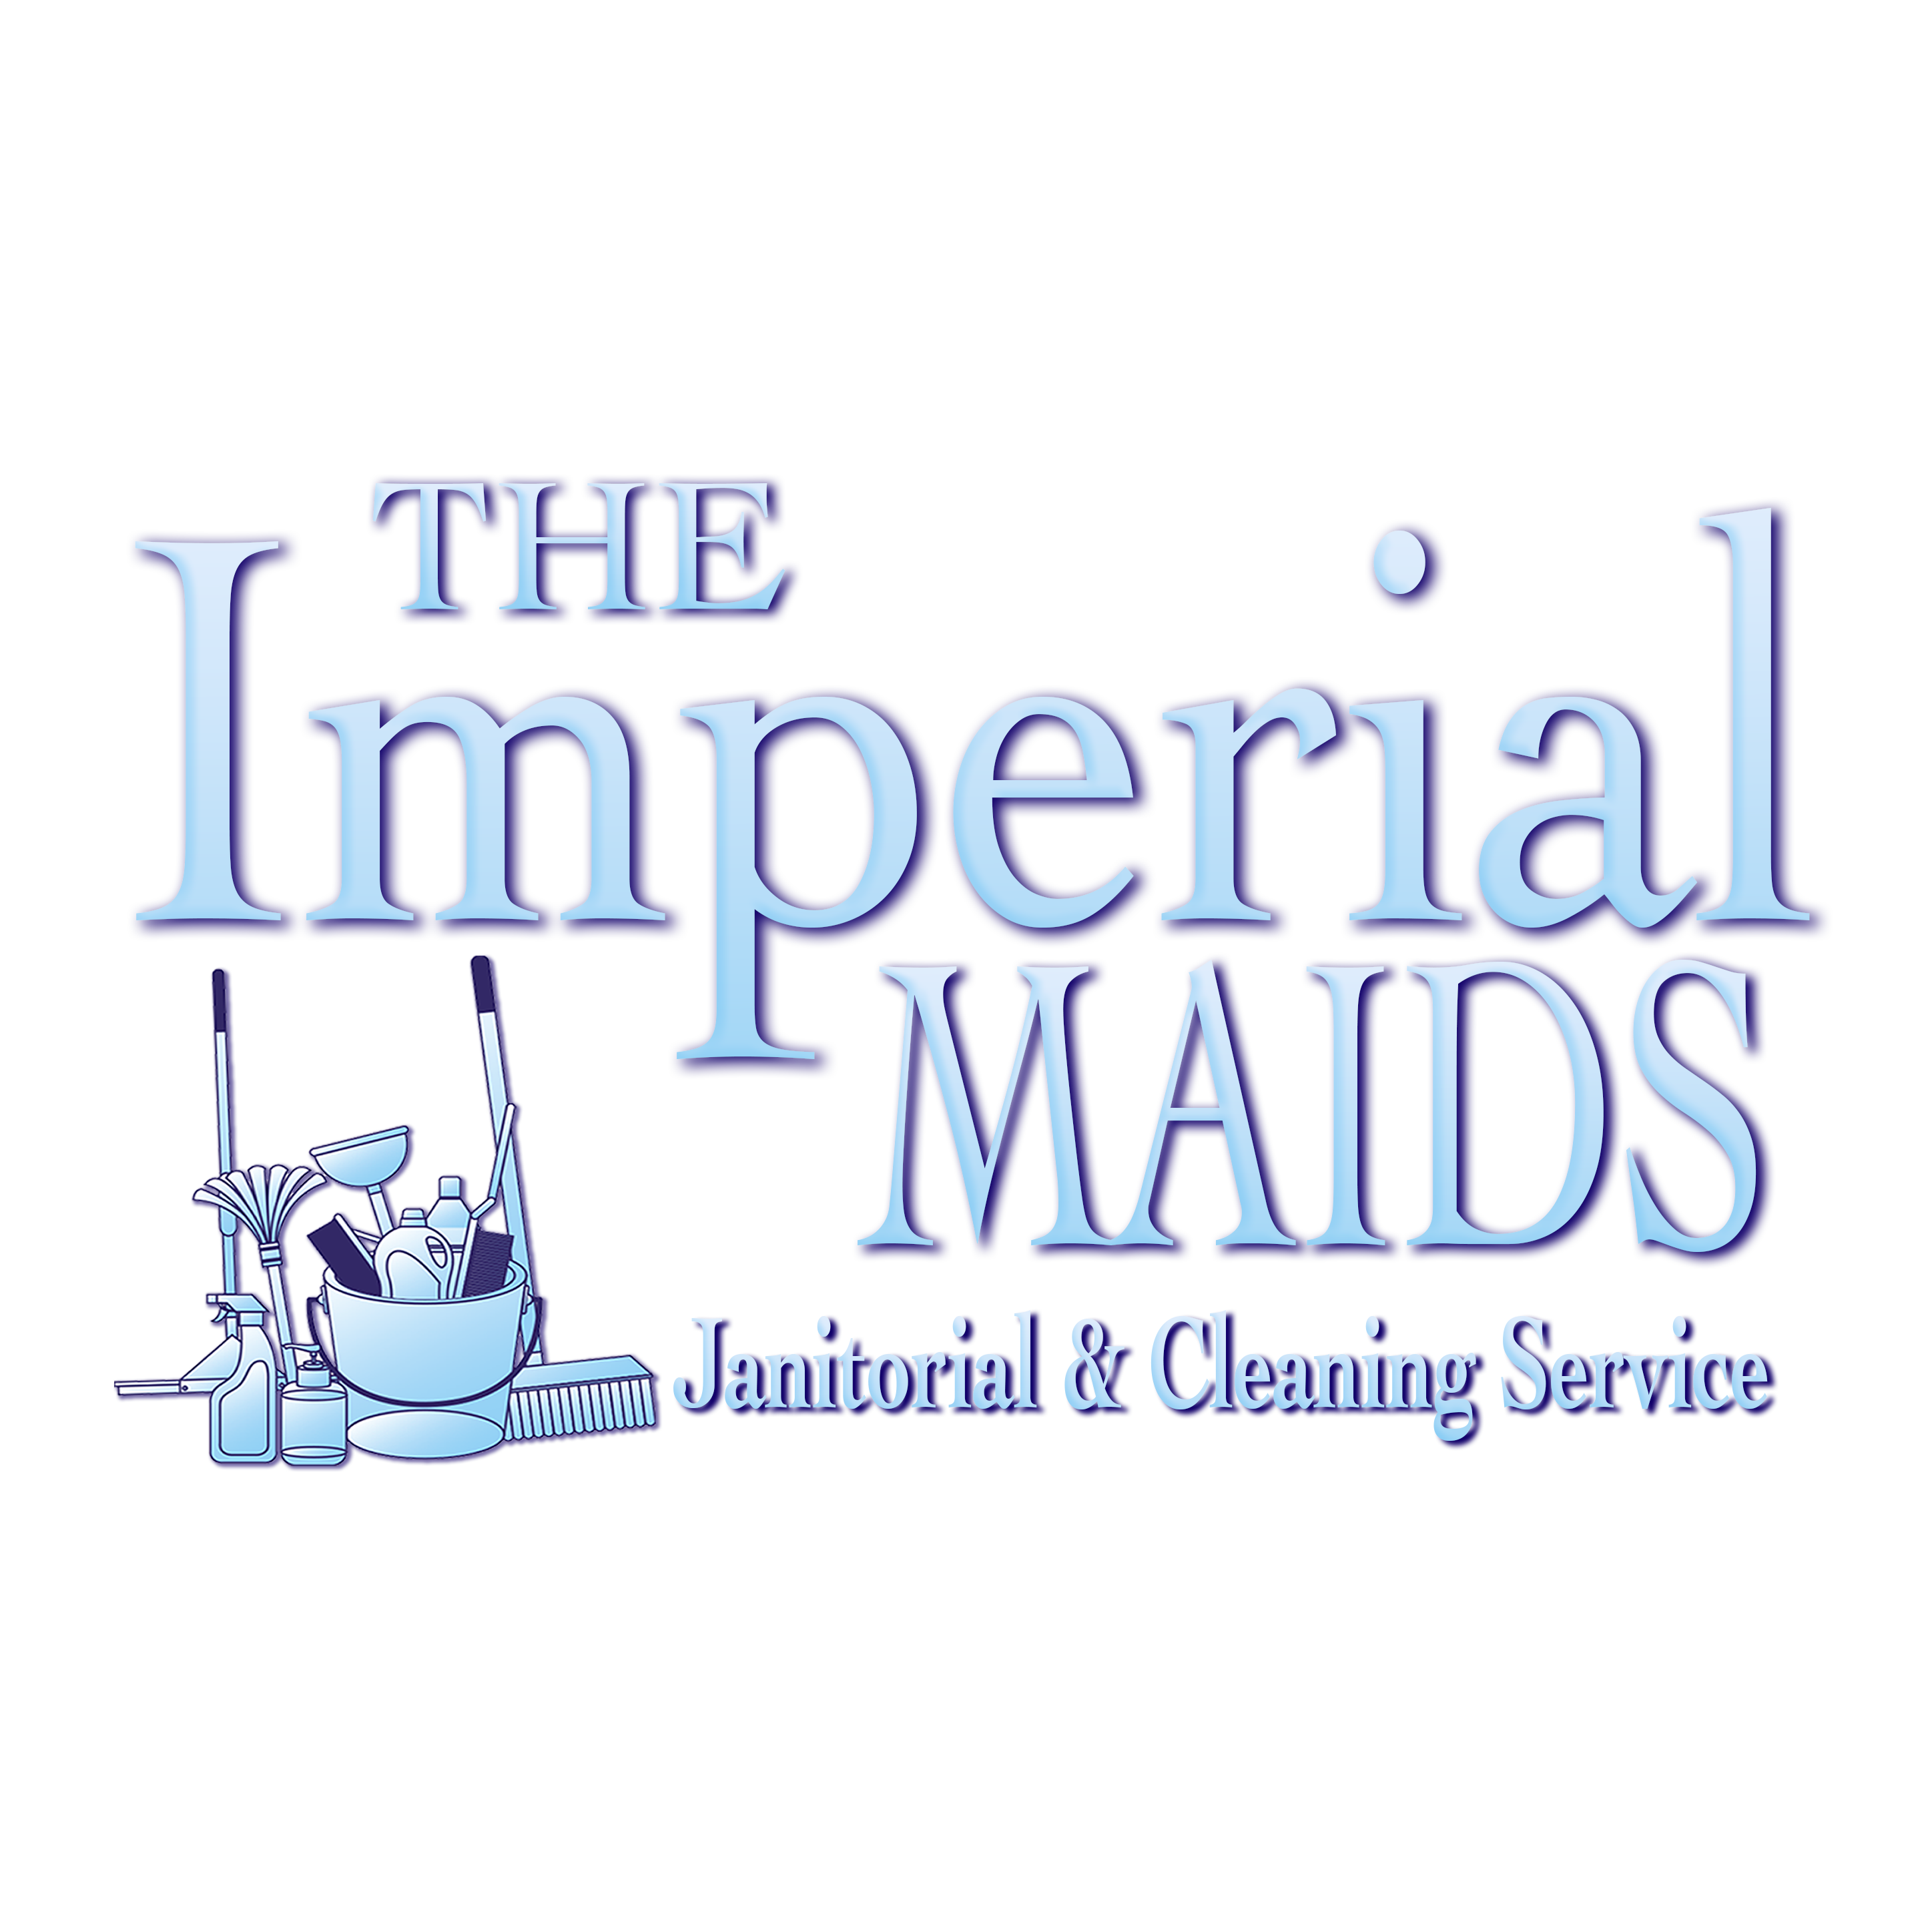 The Imperial Maids - NJ's Premium cleaning & janitorial service